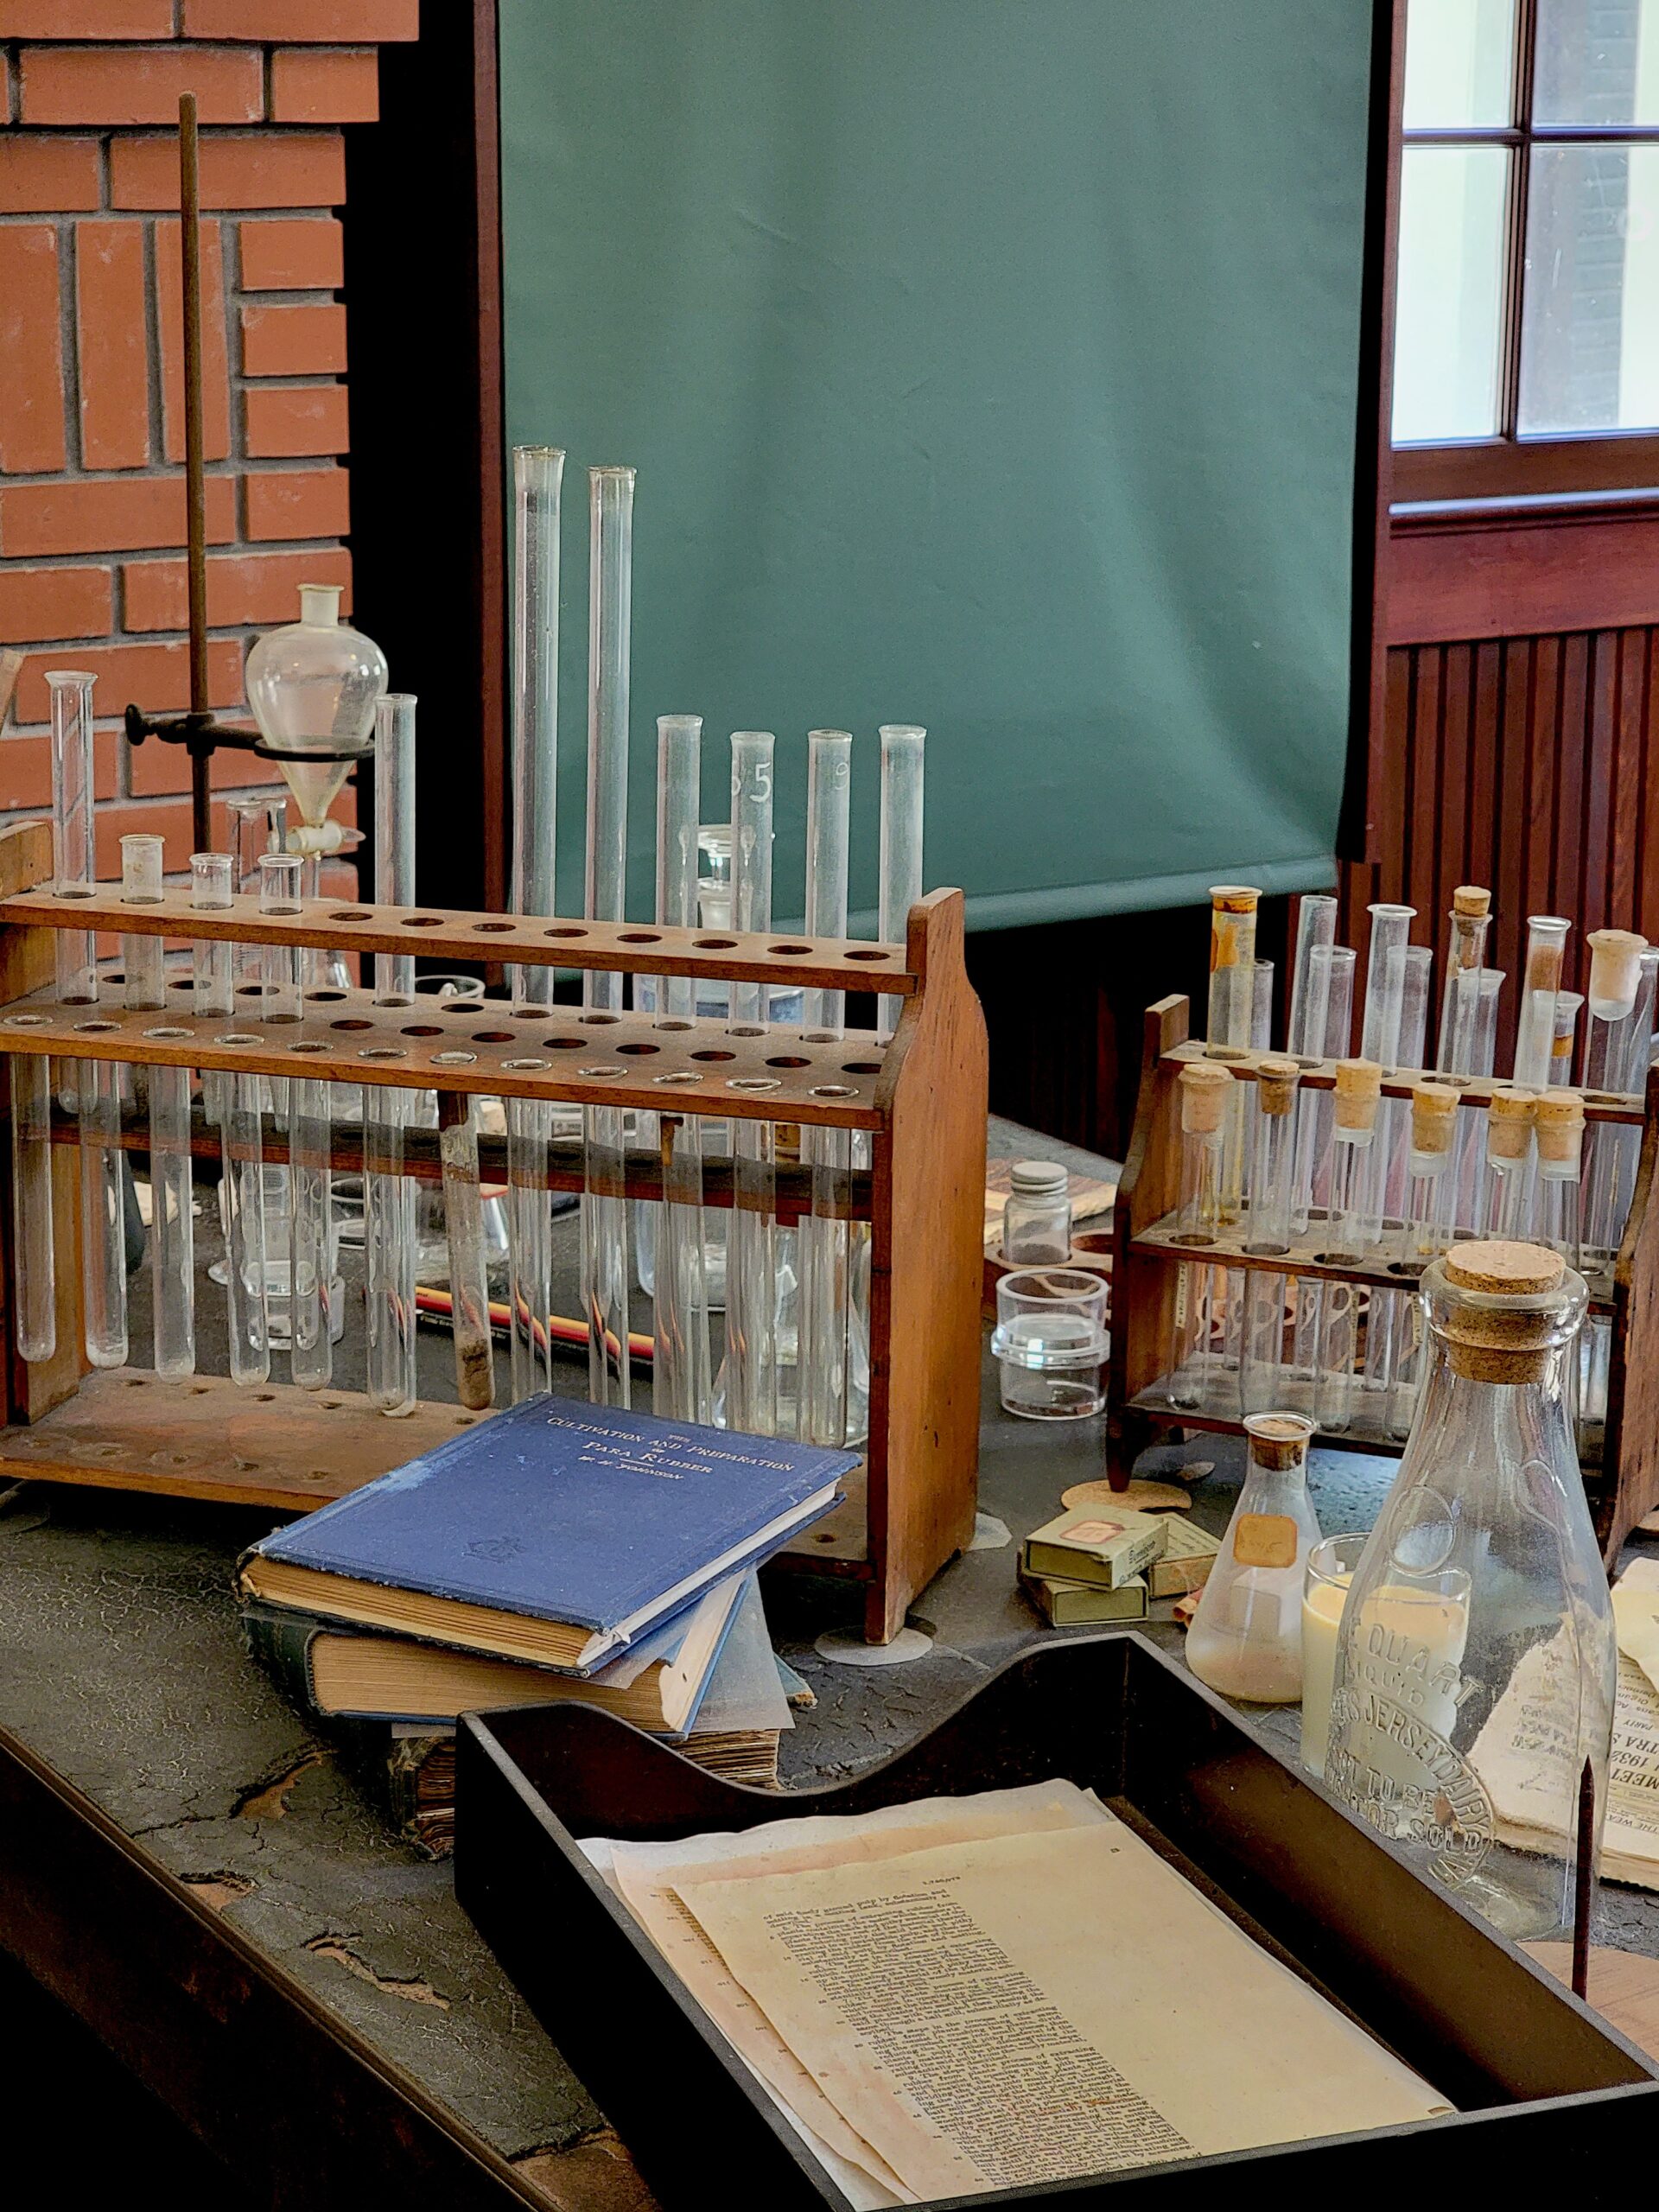 Chemistry lab and test tubes